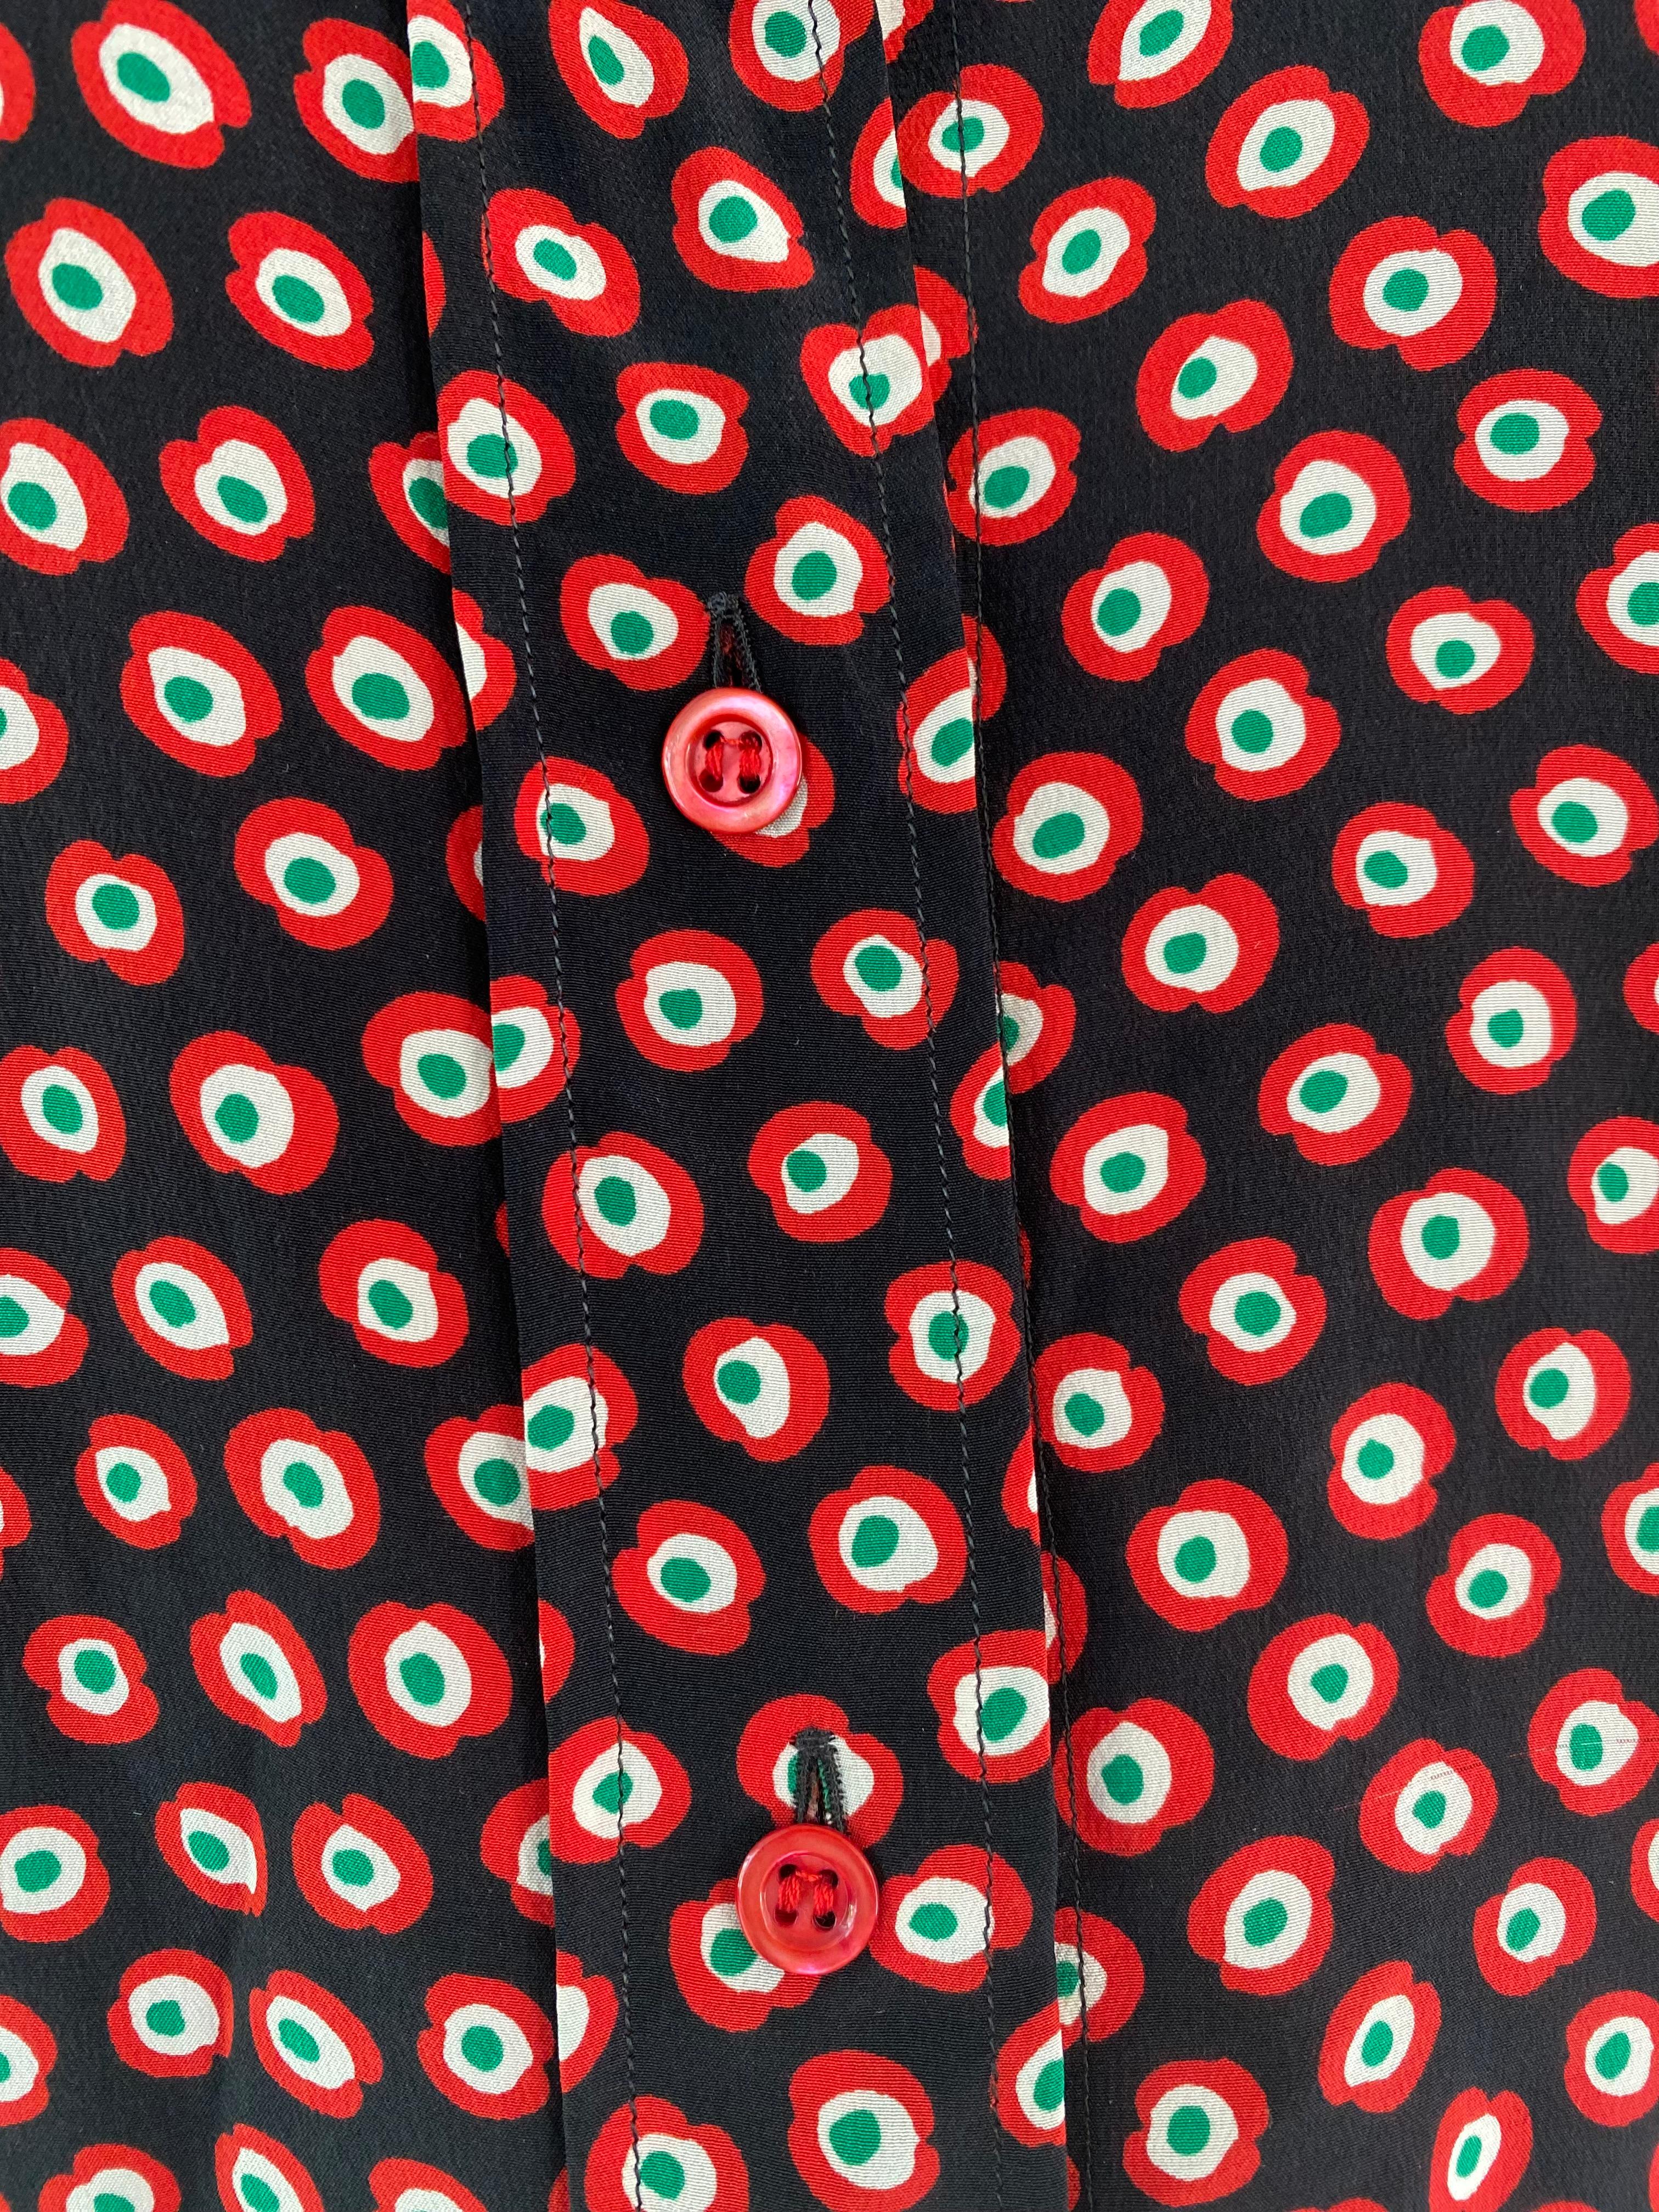 1970s YSL Yves Saint Laurent Rive Gauche red patterned button down shirt. To fabric tag but it feels like a silk. The buttons are red and it has a bow from the same fabric that can be tied around the neck. The circular pattern is set on a black